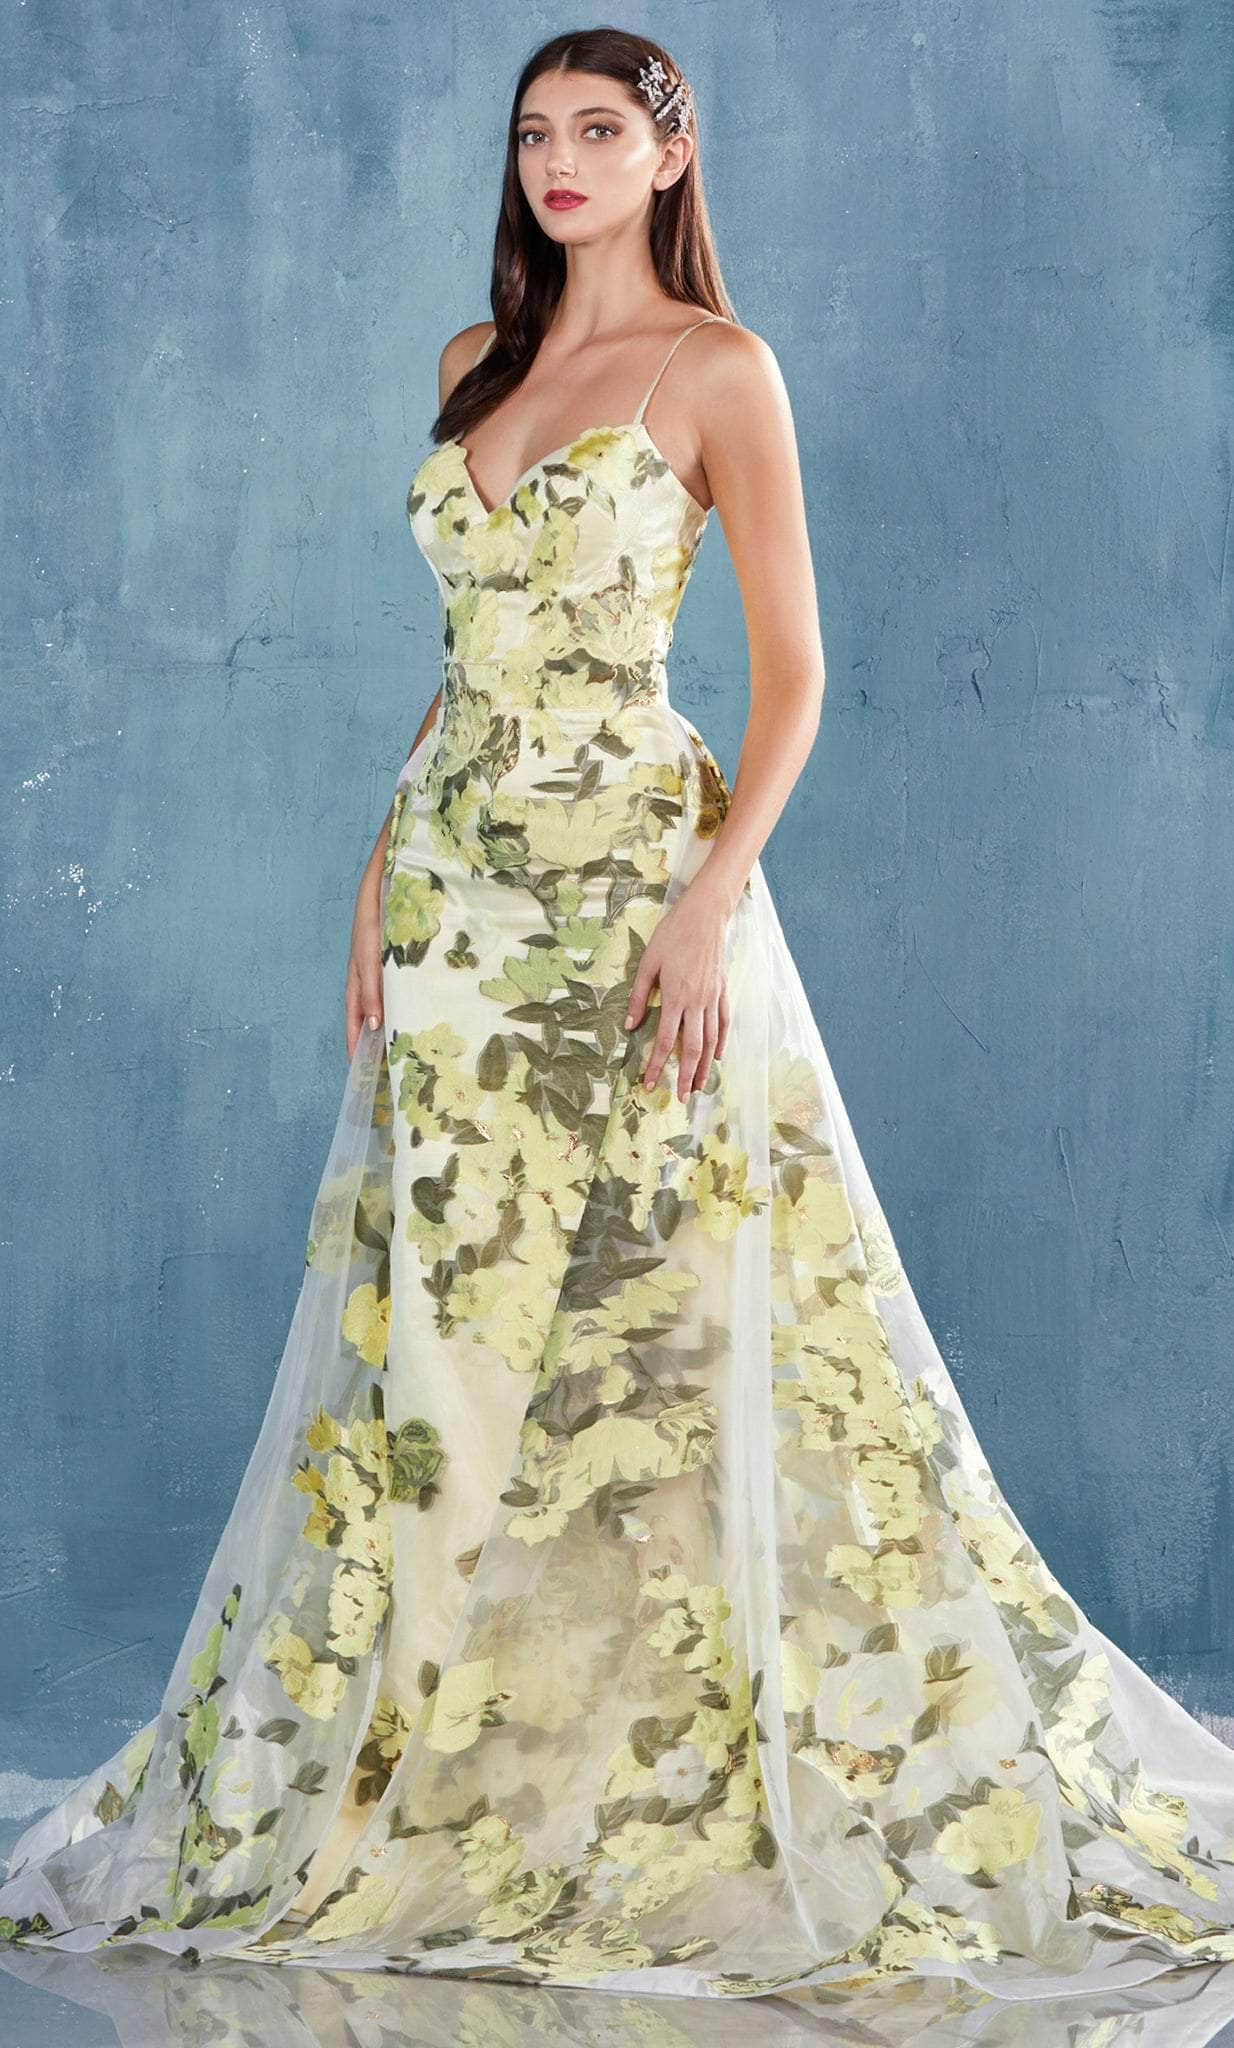 Andrea and Leo A0770 - Floral Sleeveless Prom Dress Prom Dresses